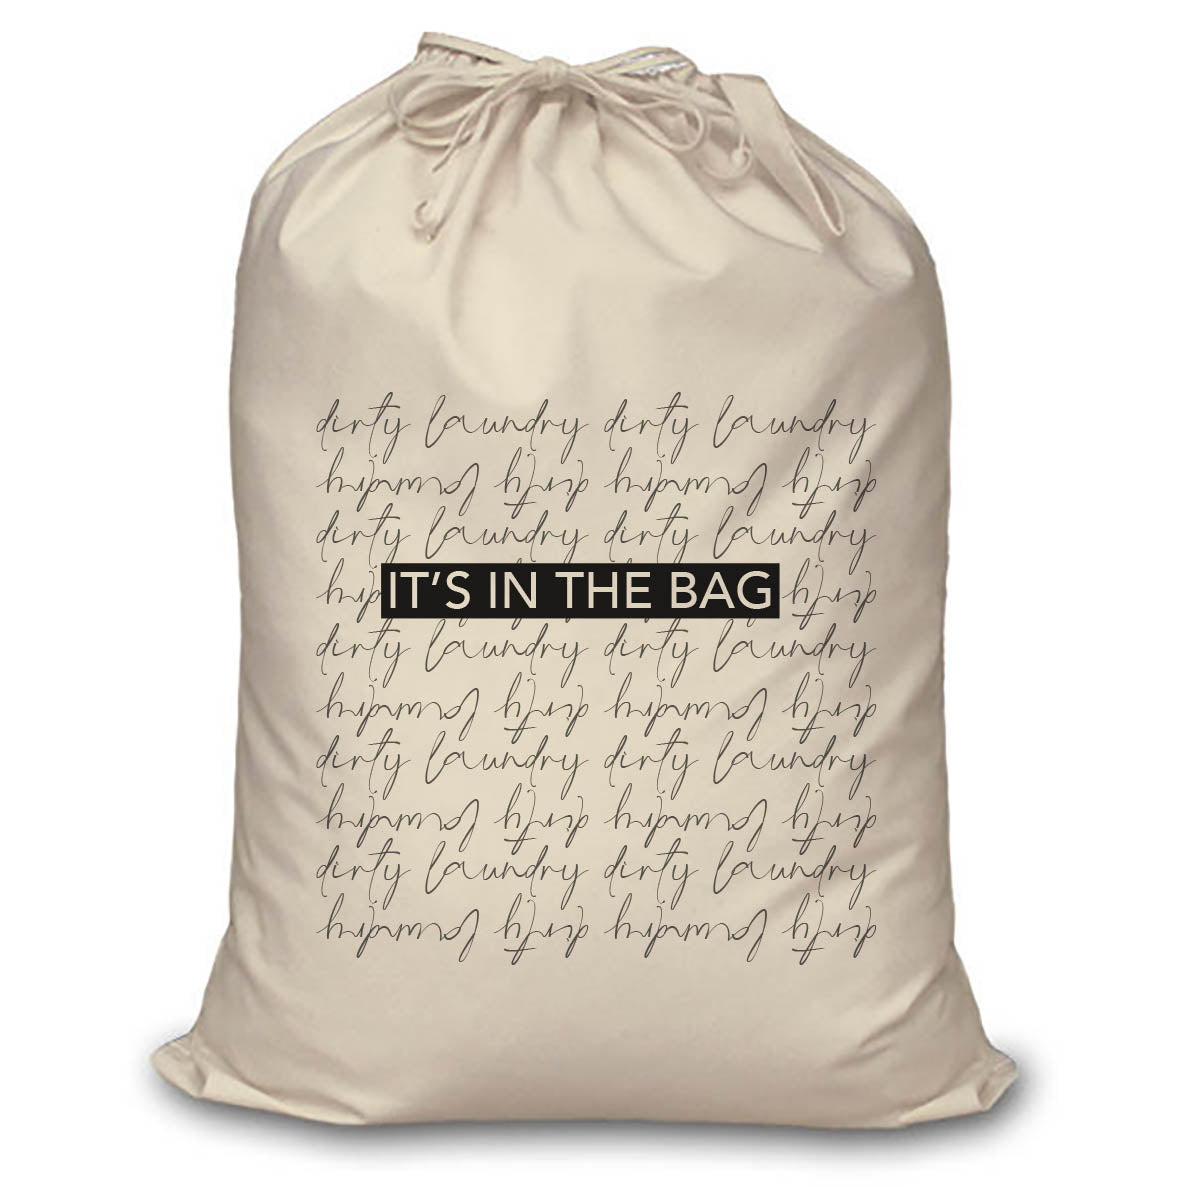 It's in the bag...Laundry Bag